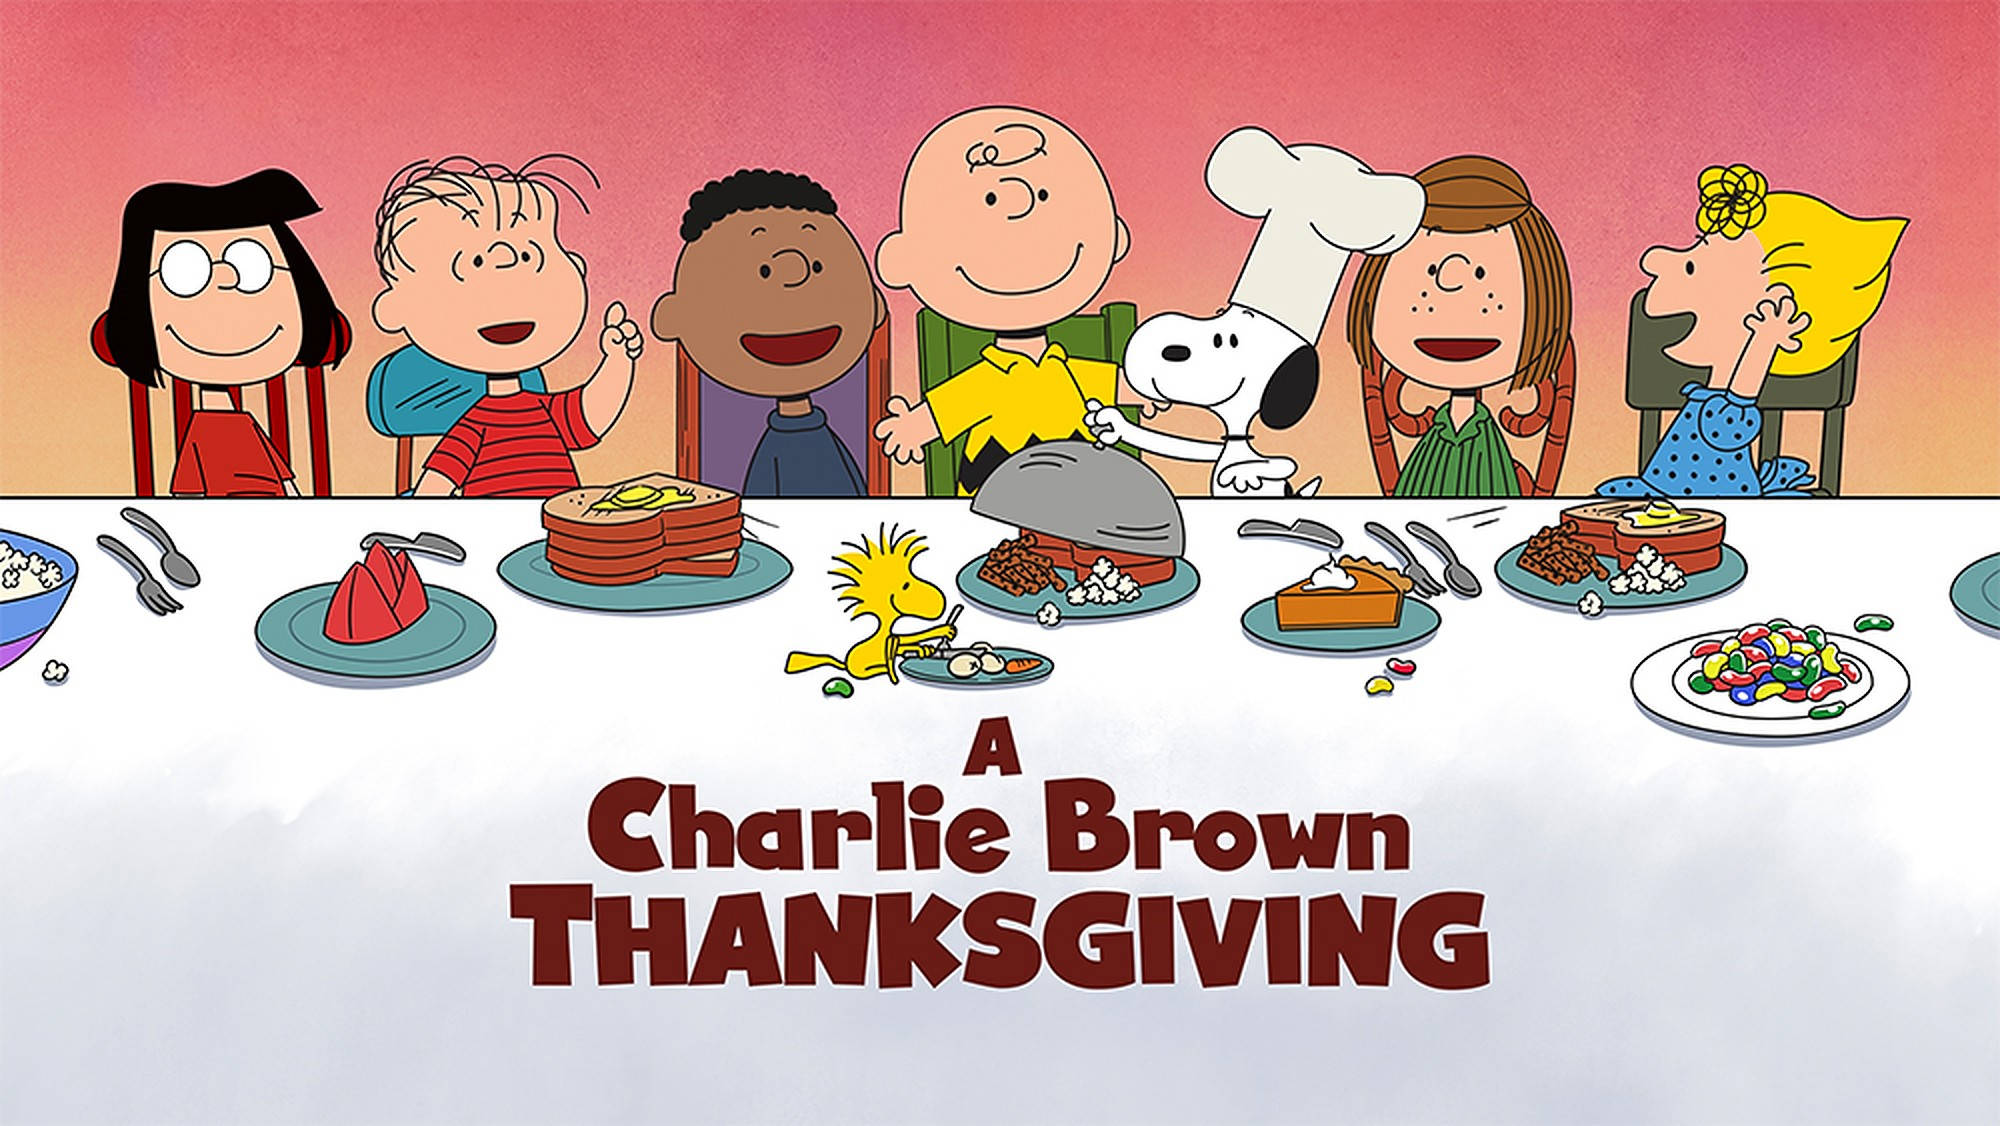 Charlie Brown Thanksgiving Feast Background